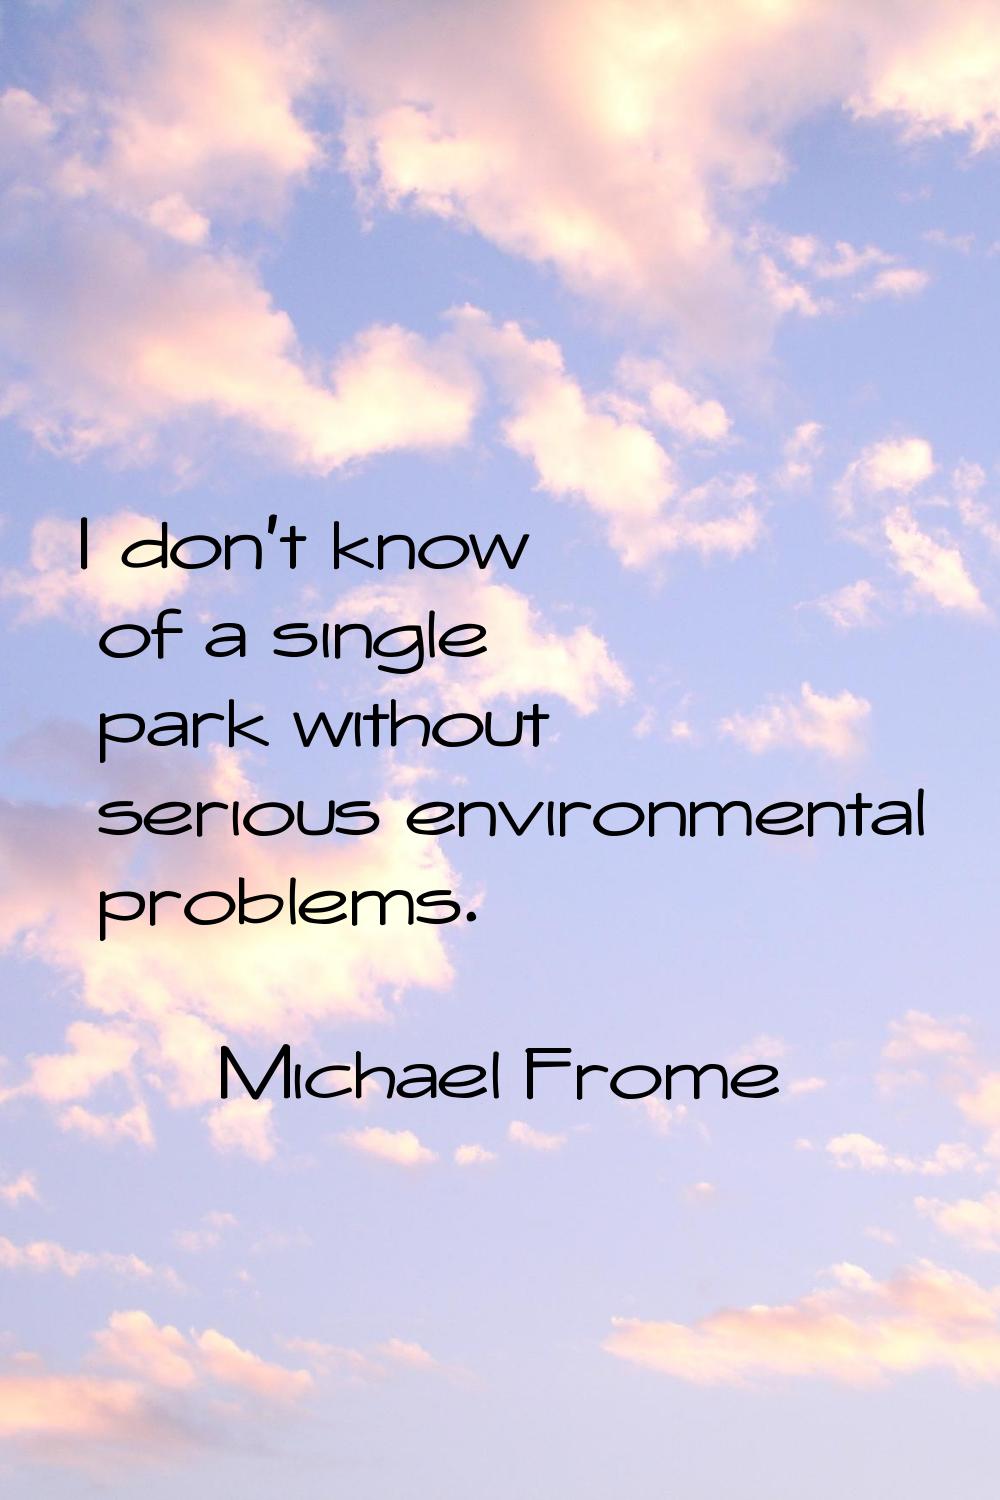 I don't know of a single park without serious environmental problems.